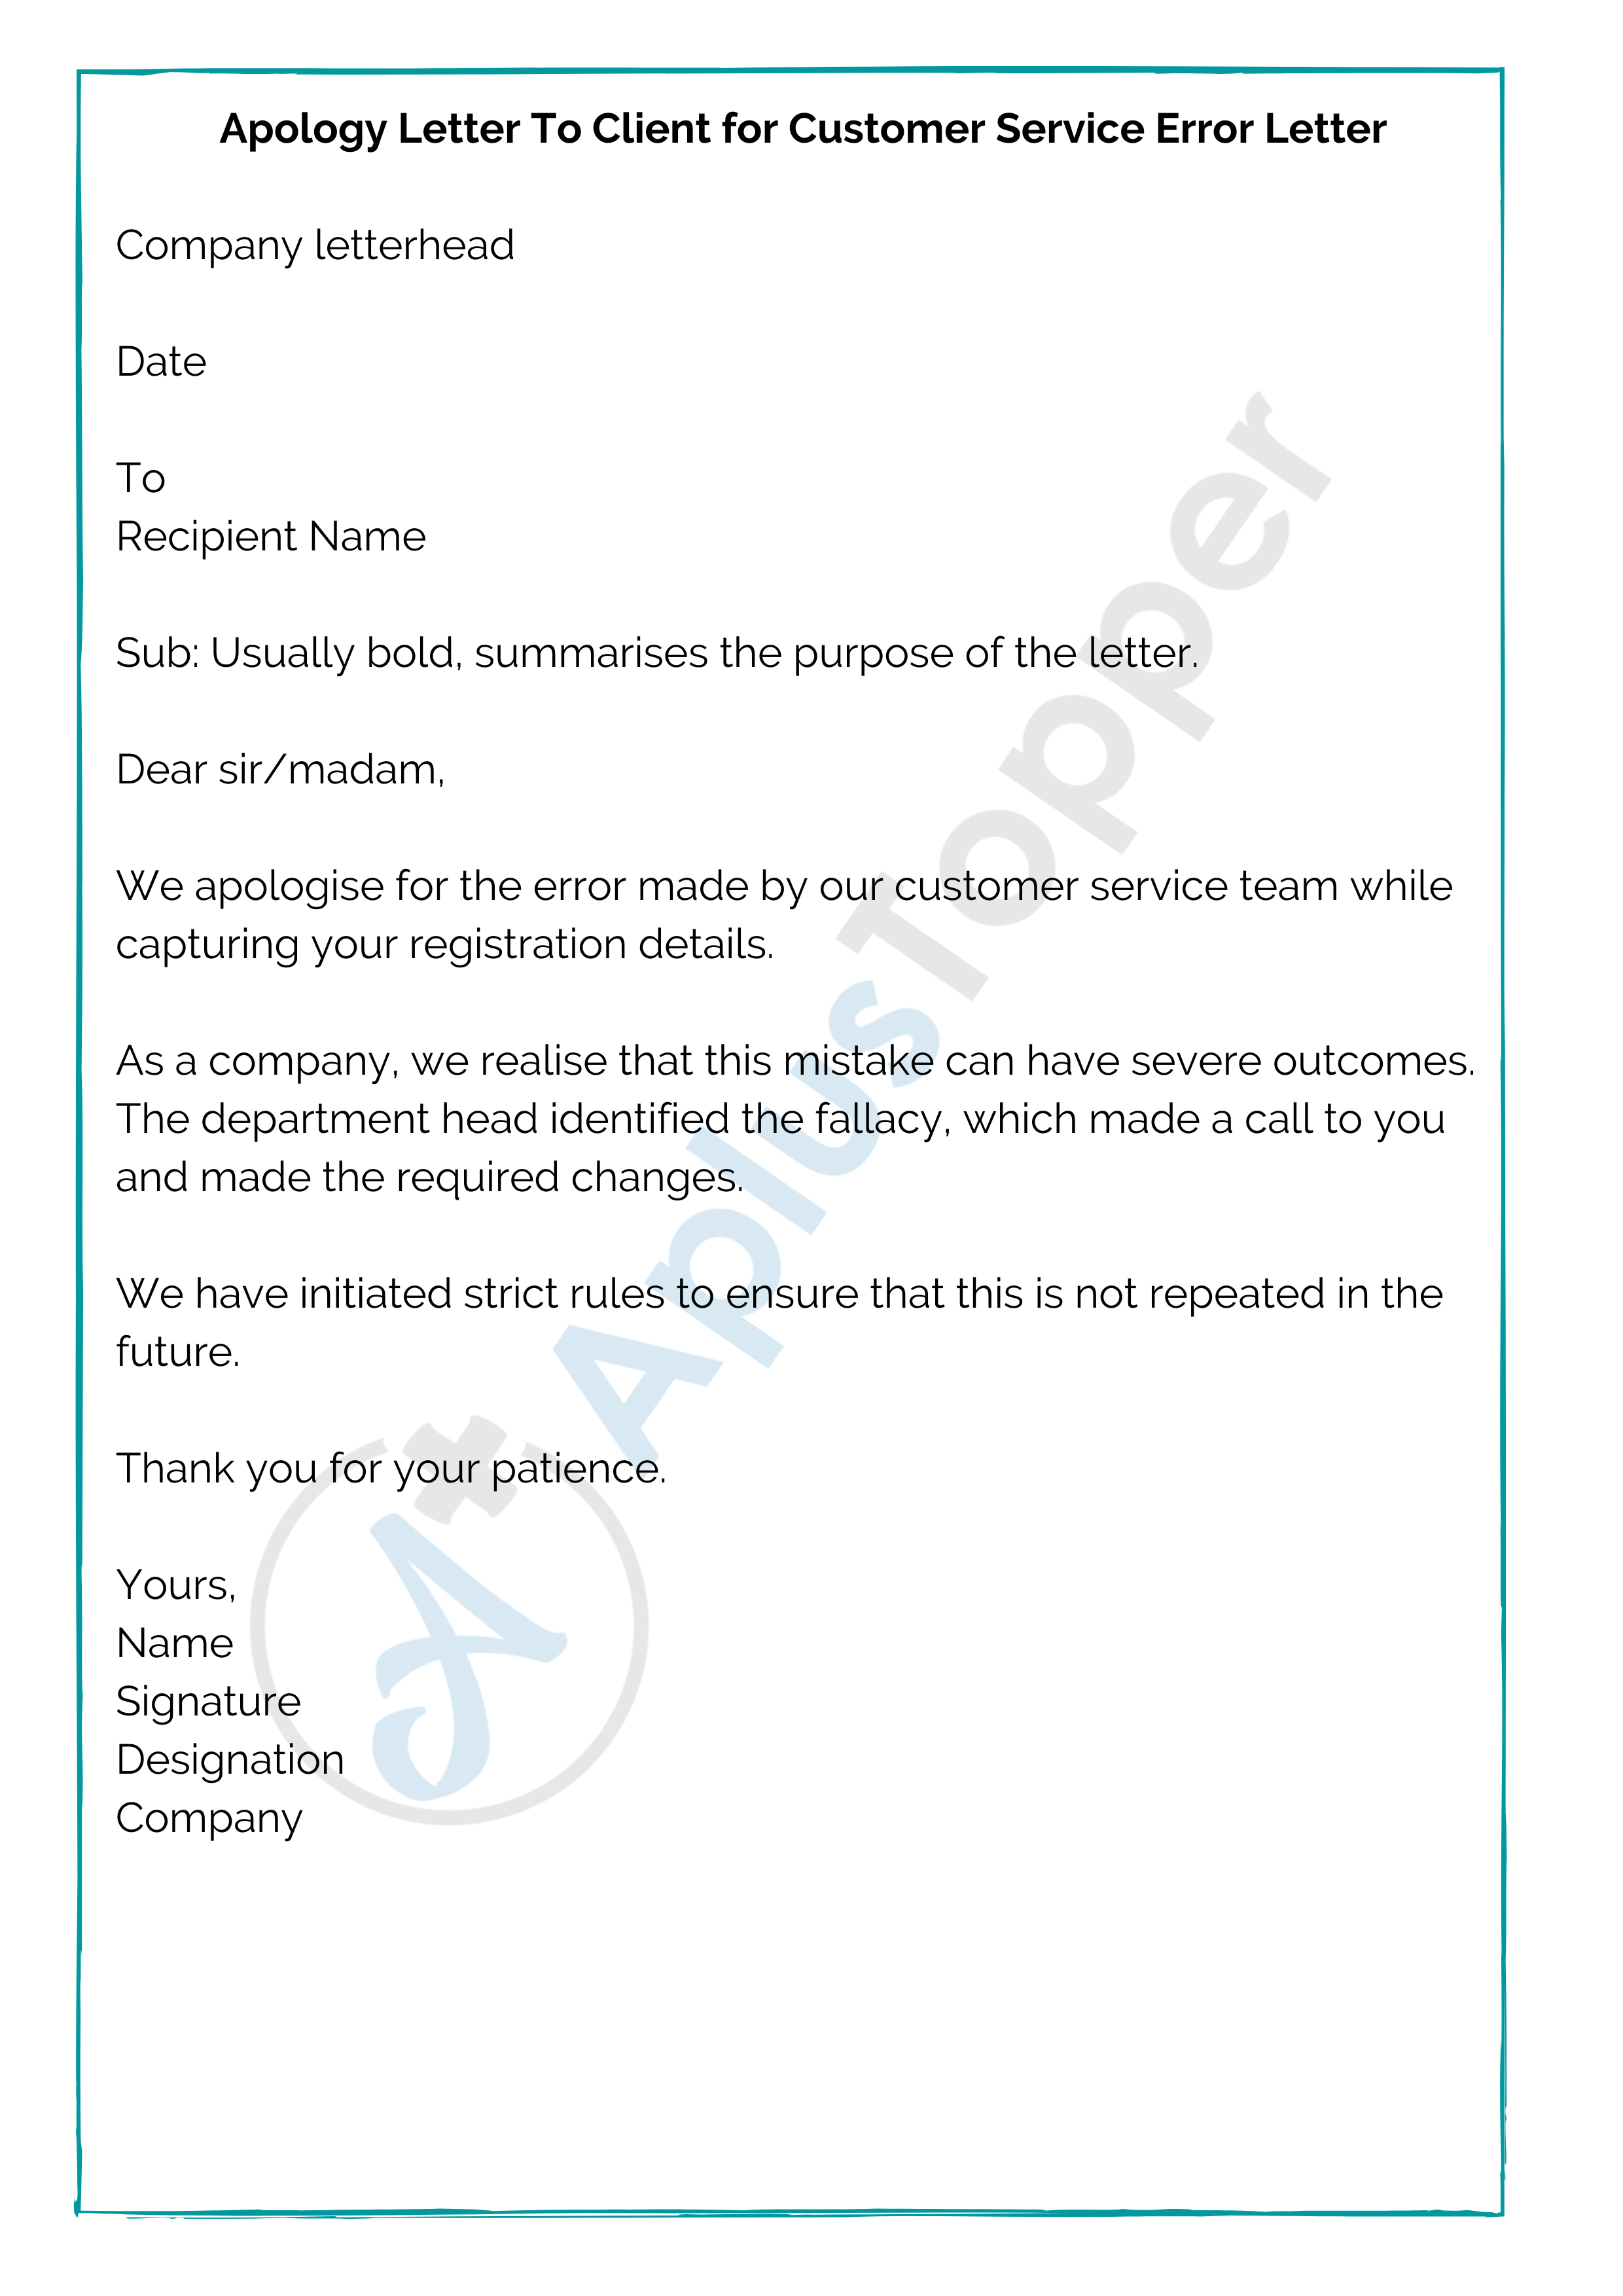 11+ Sample Letter of Error  Format, Samples and Examples of Error